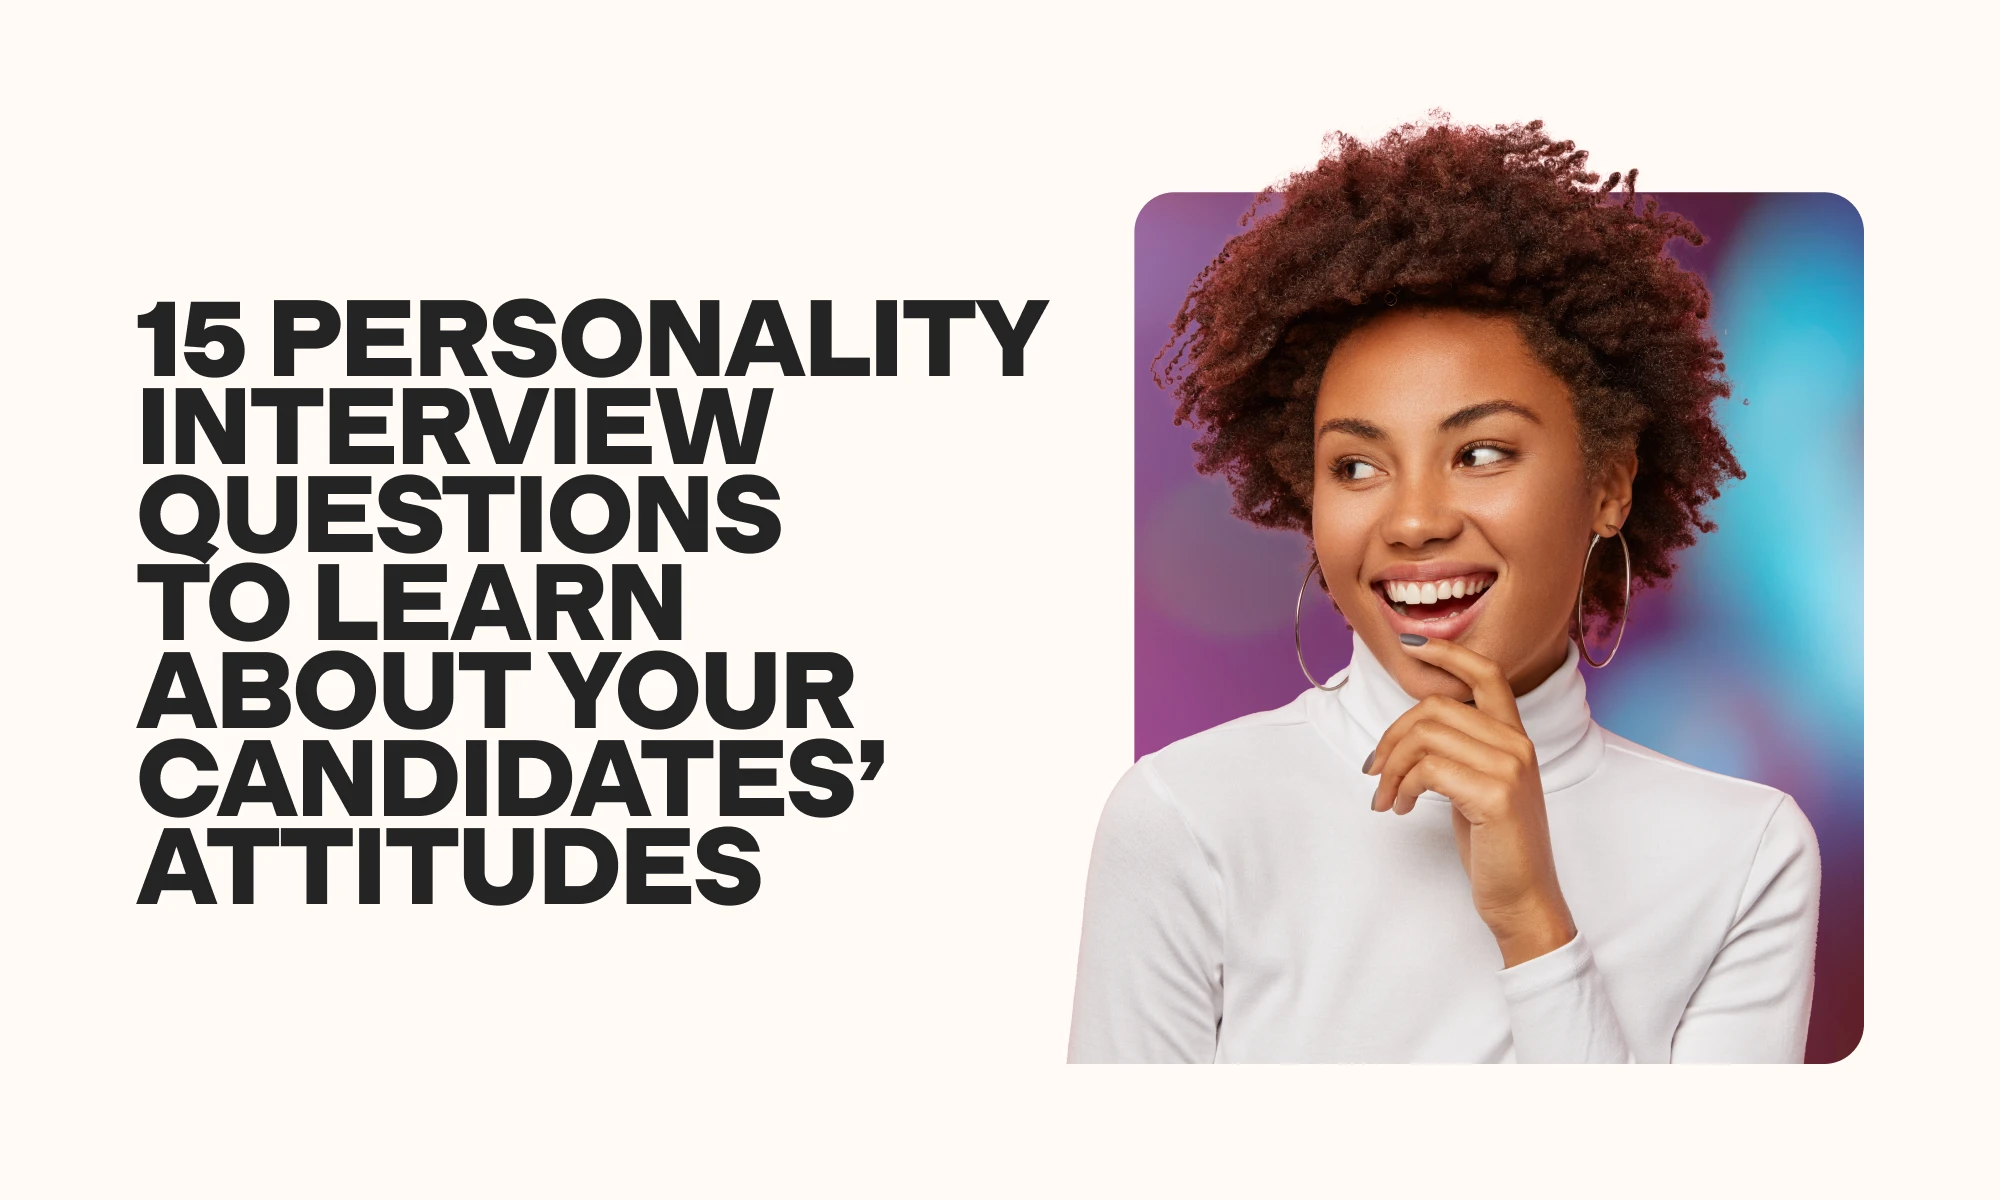 15 personality interview questions to learn about your candidates attitudes